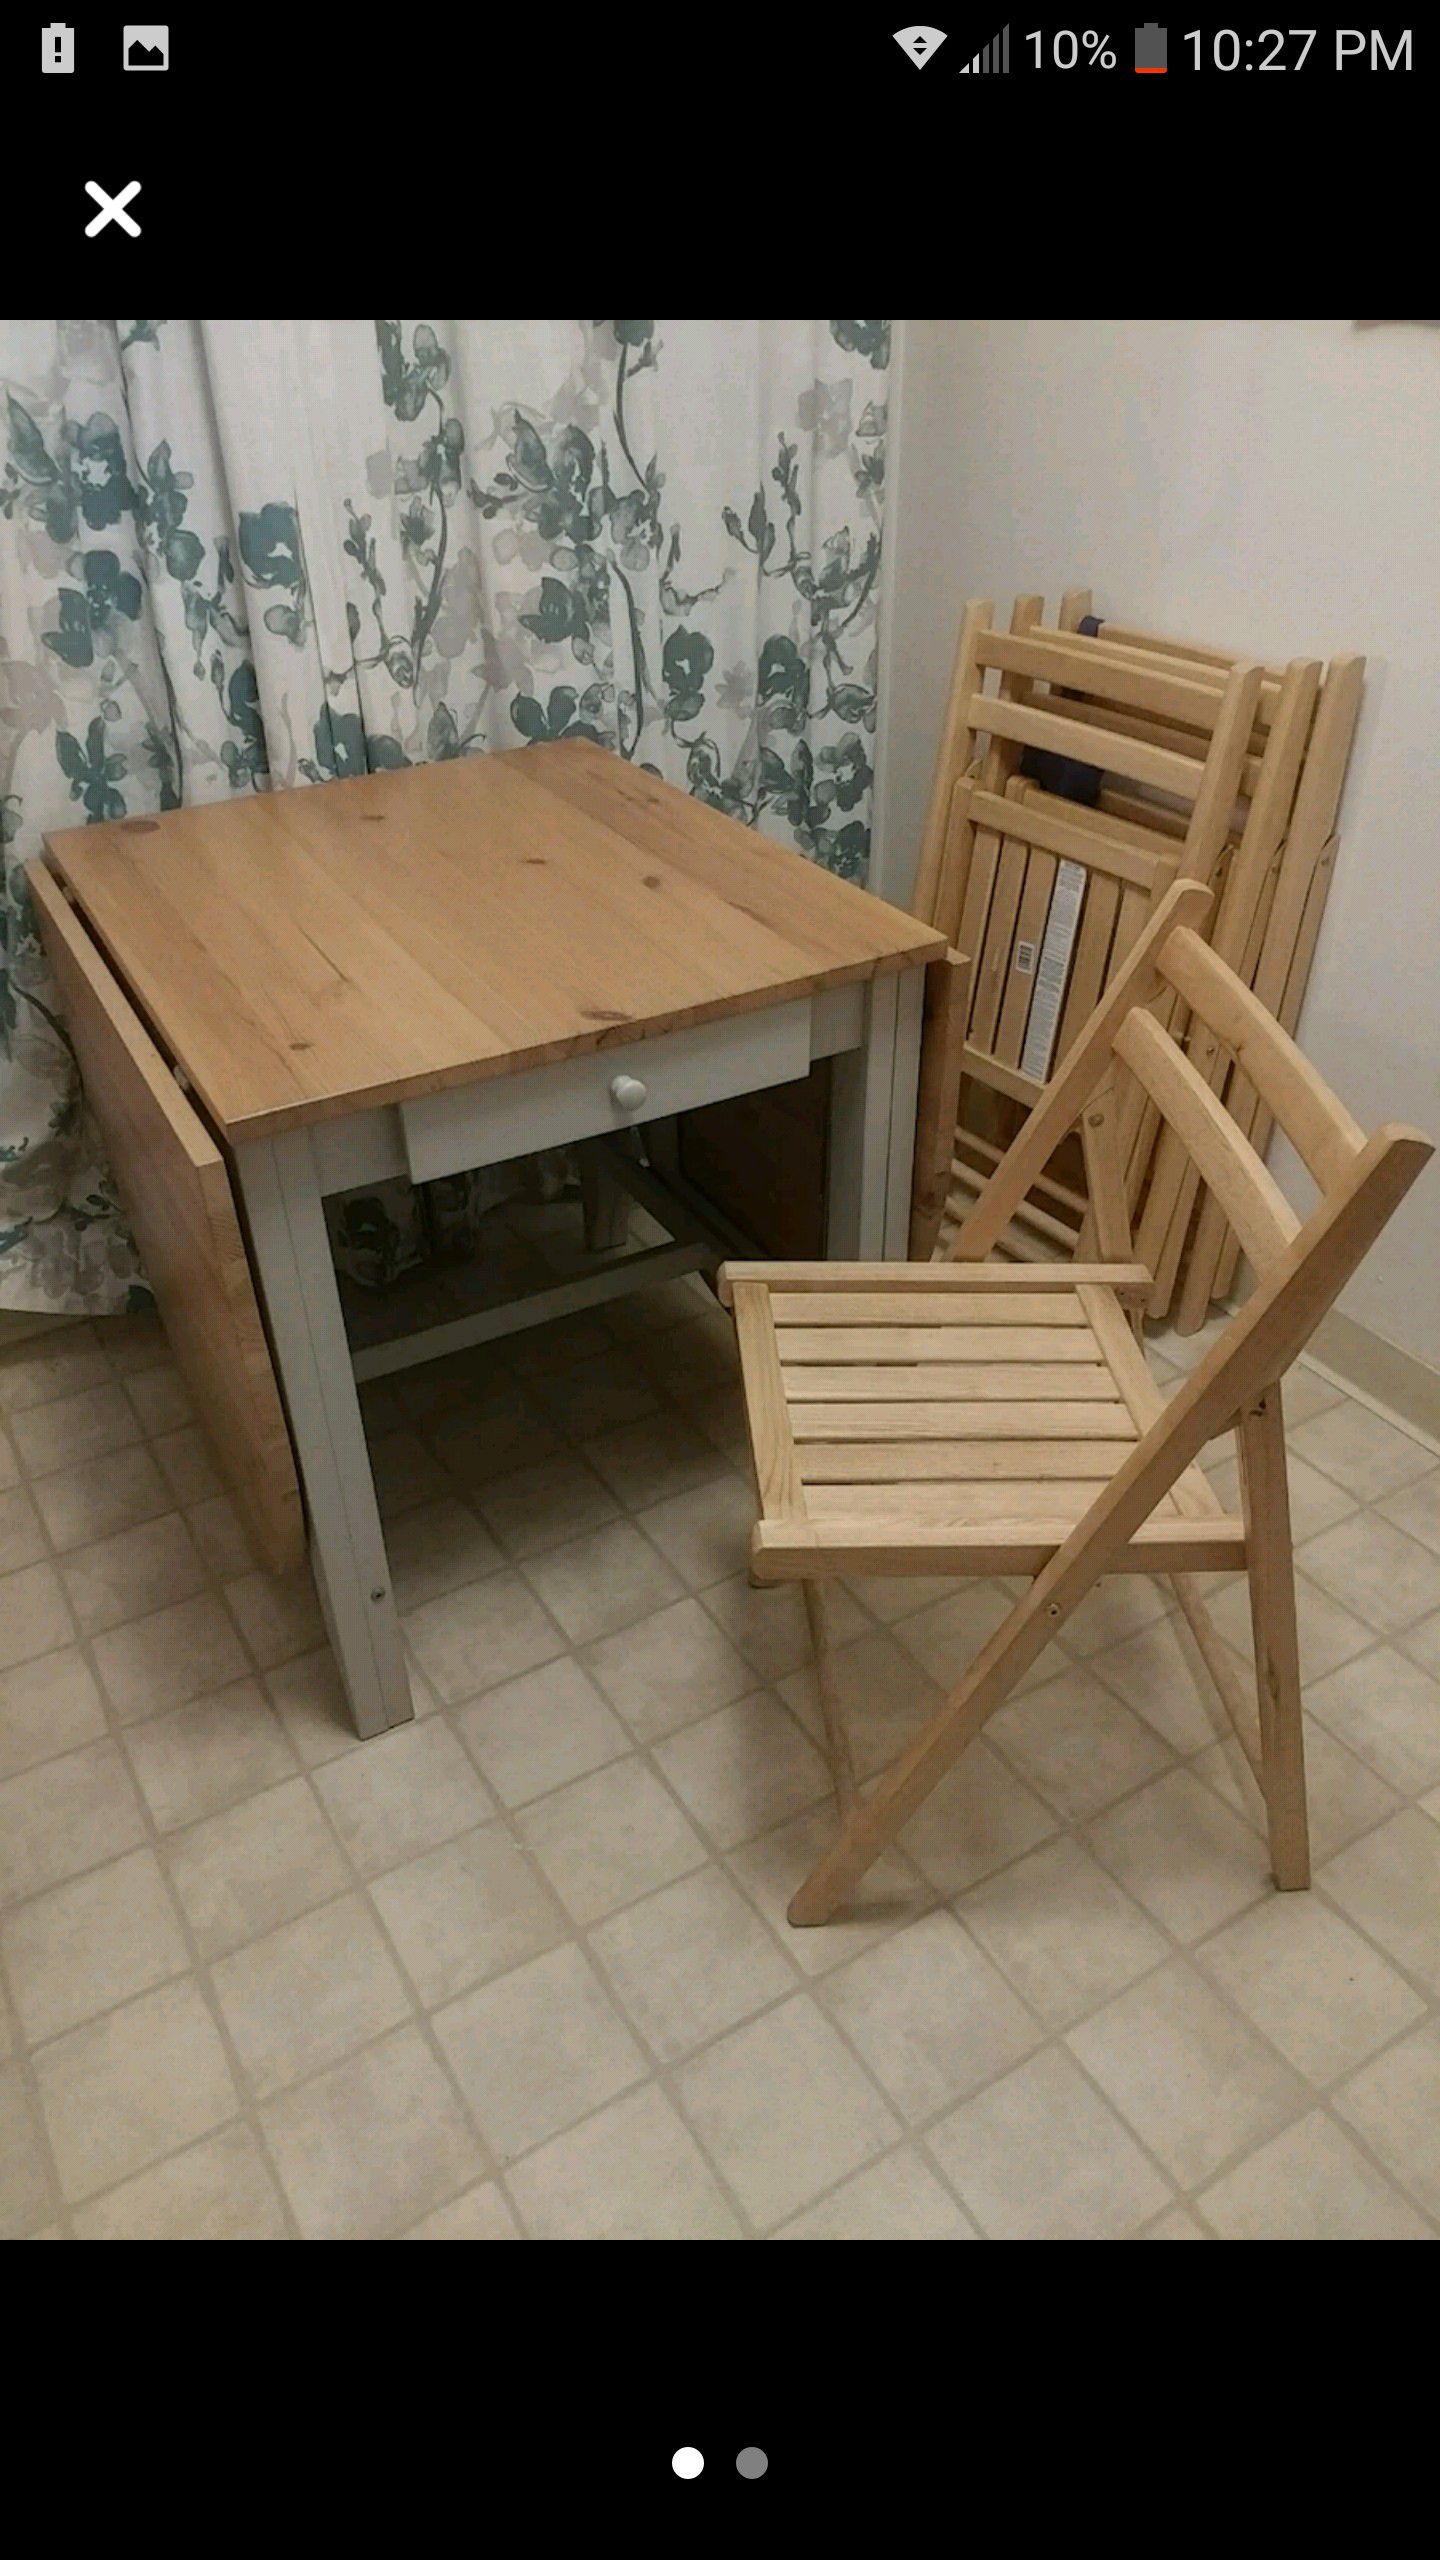 Expandable IKEA kitchen table with 4 chairs